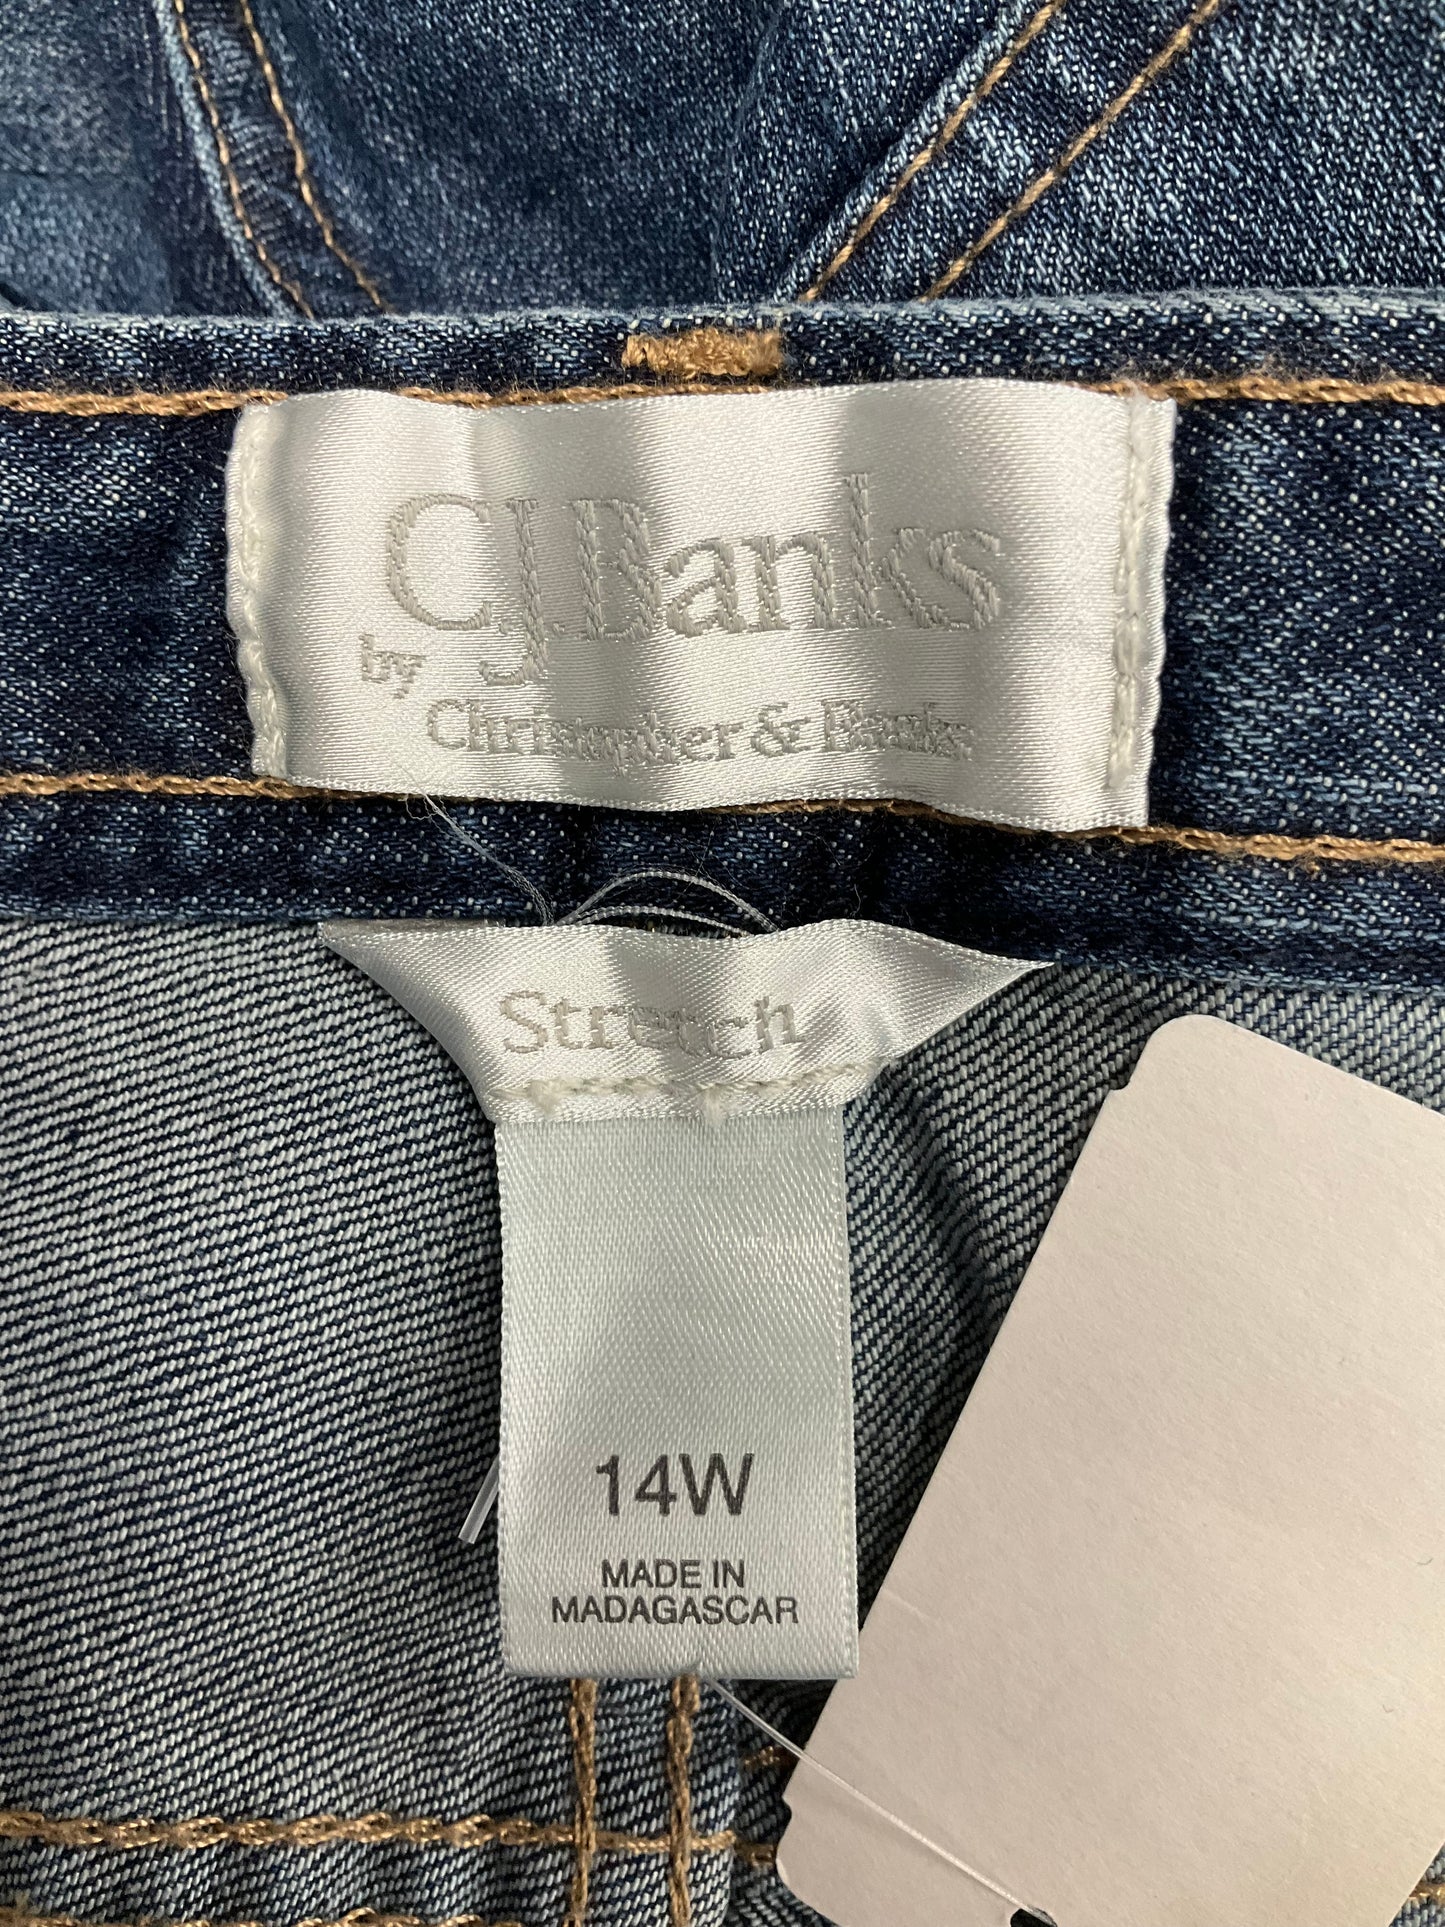 Jeans Straight By Cj Banks  Size: 14